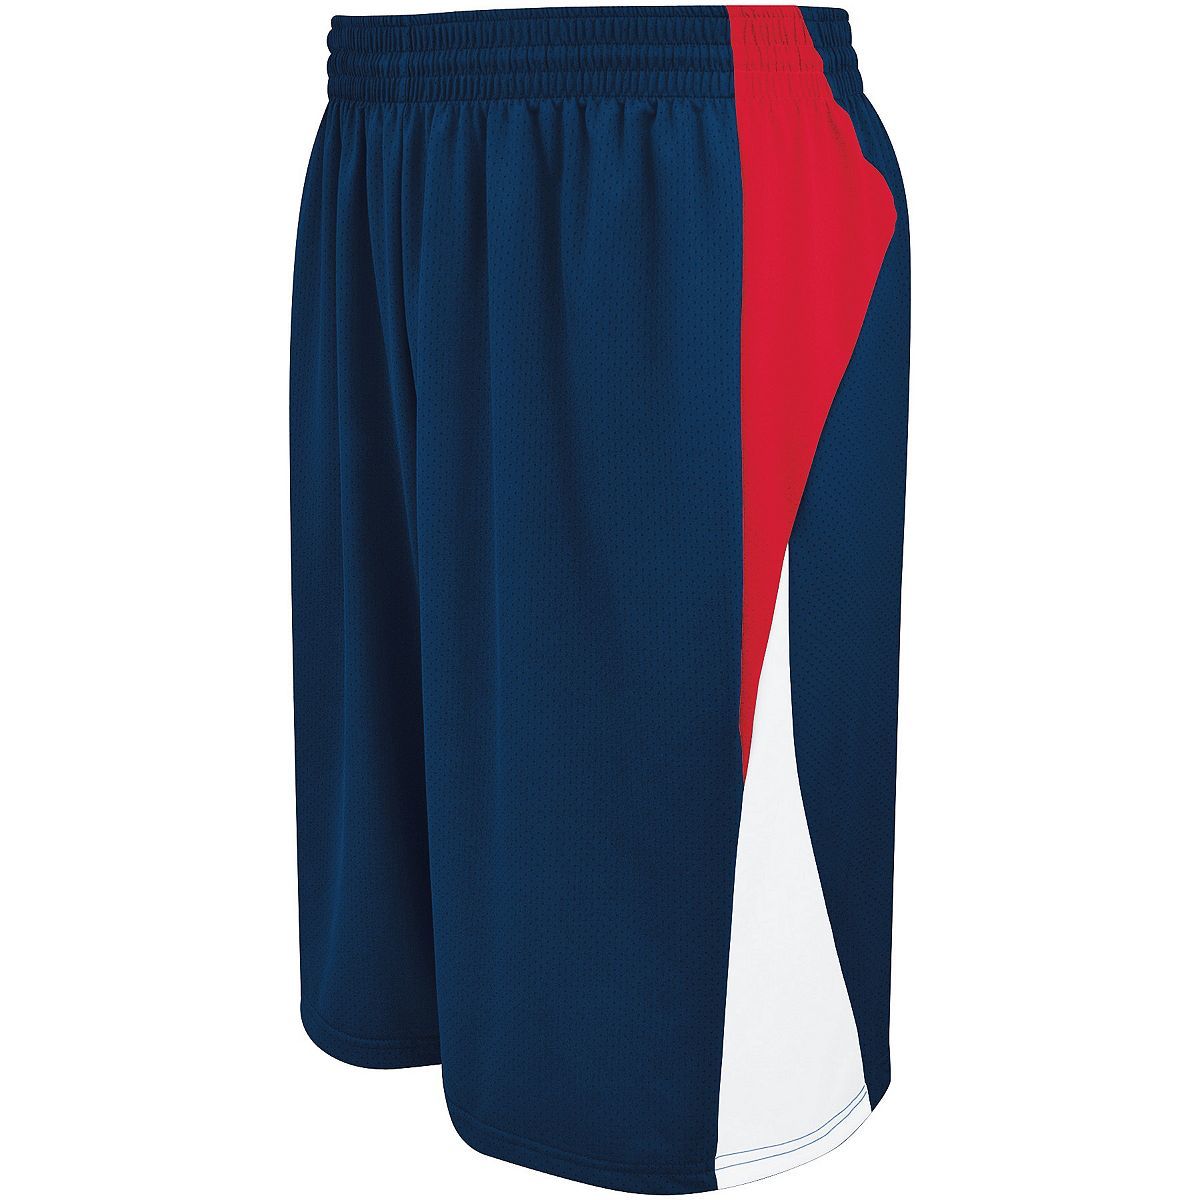 Holloway Campus Reversible Shorts in Navy/Scarlet/White  -Part of the Adult, Adult-Shorts, Basketball, Holloway, All-Sports, All-Sports-1 product lines at KanaleyCreations.com